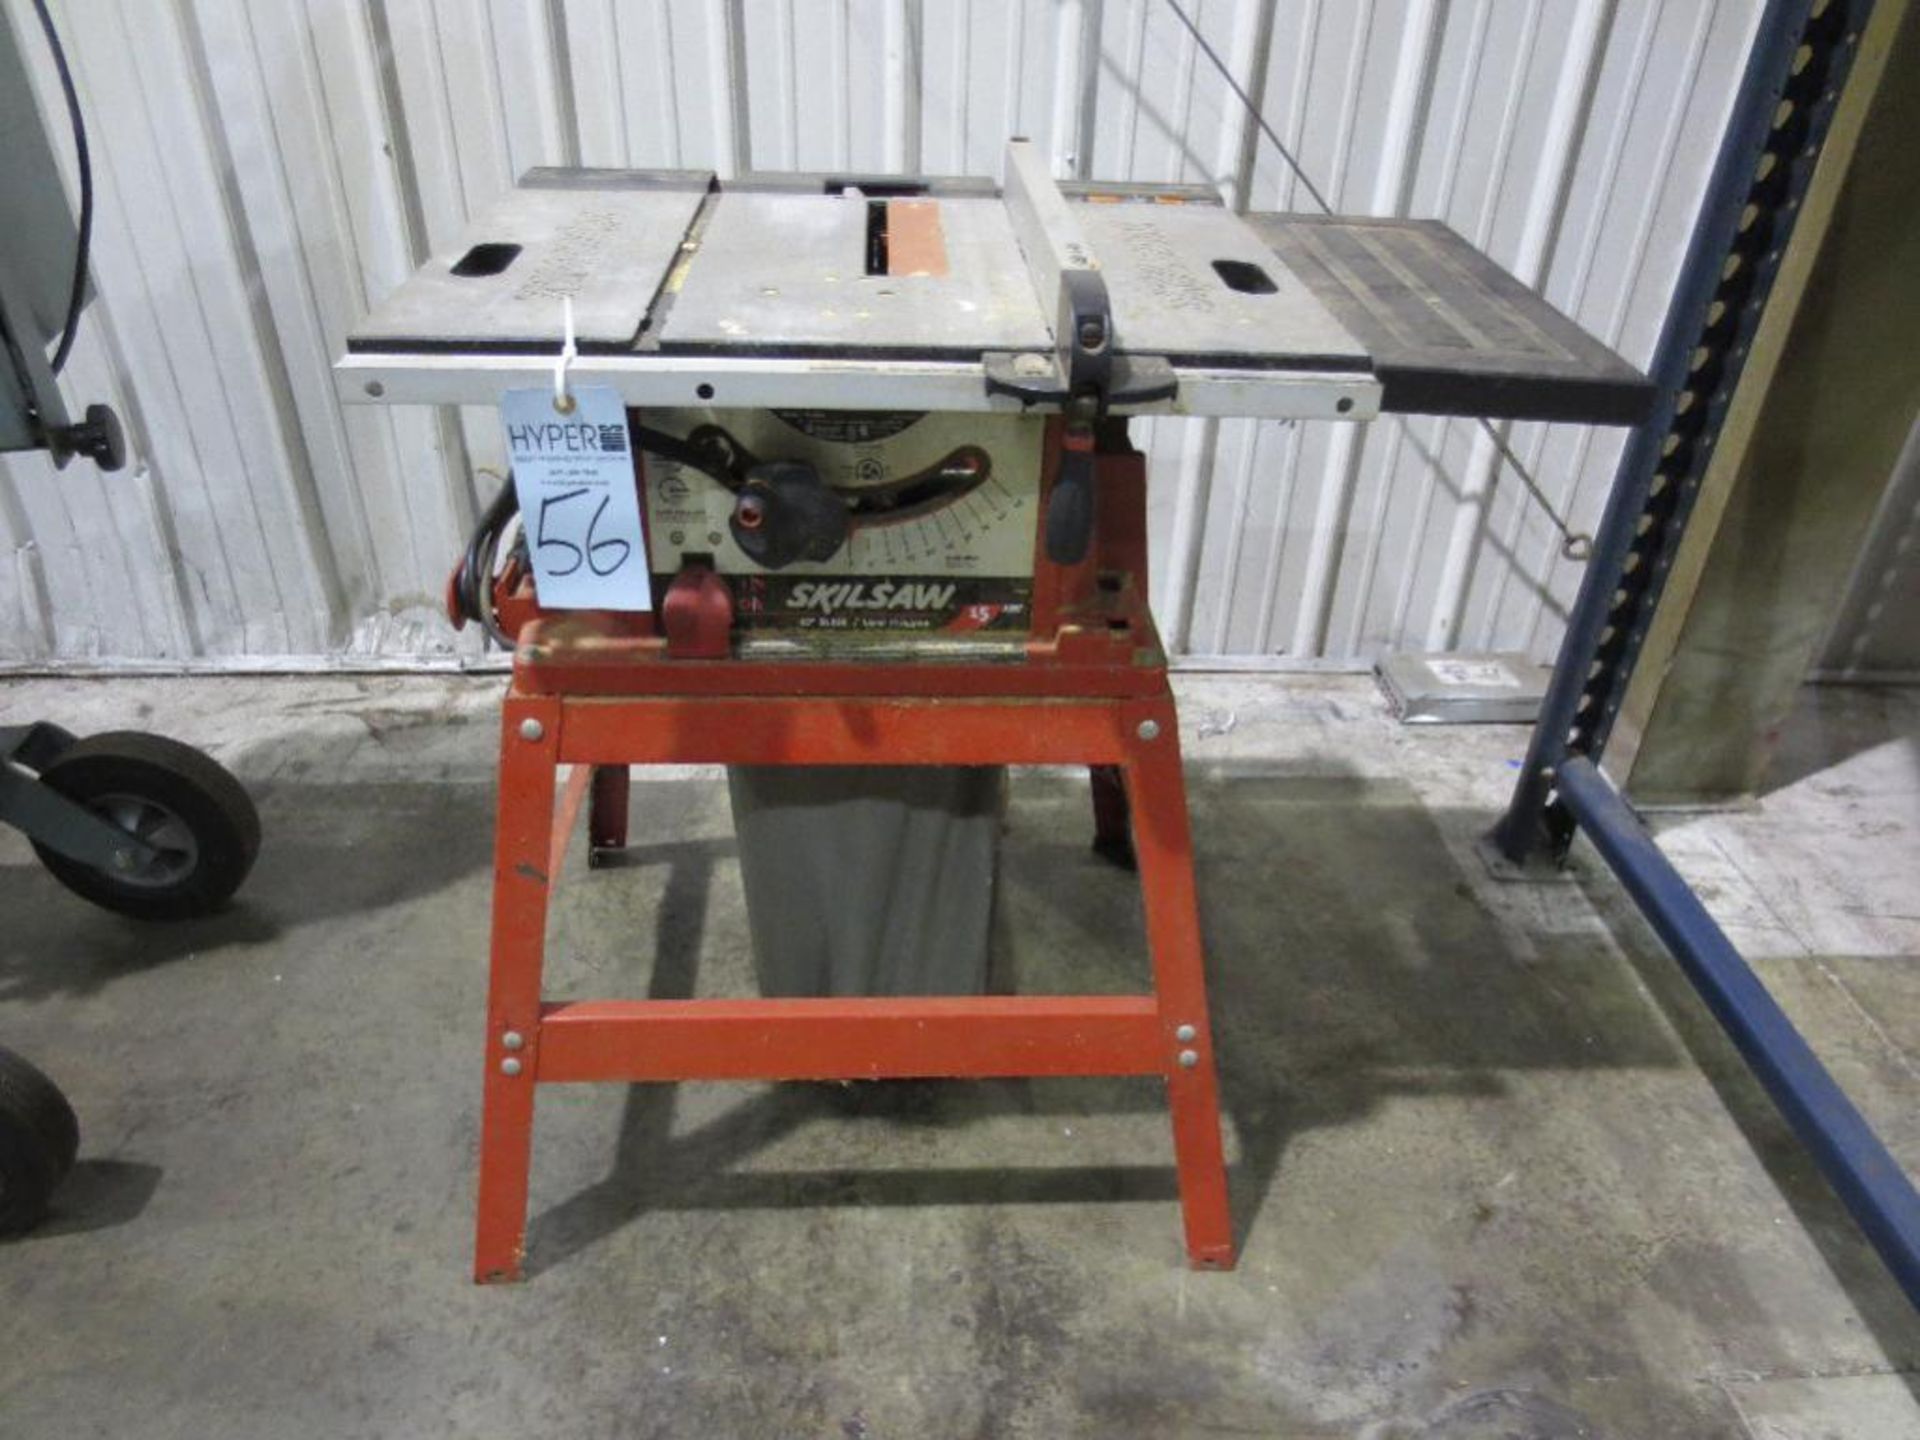 Skilsaw table saw, 10in blade, angles up to 45 degrees, 17in x 27in work surface, dust bag collector